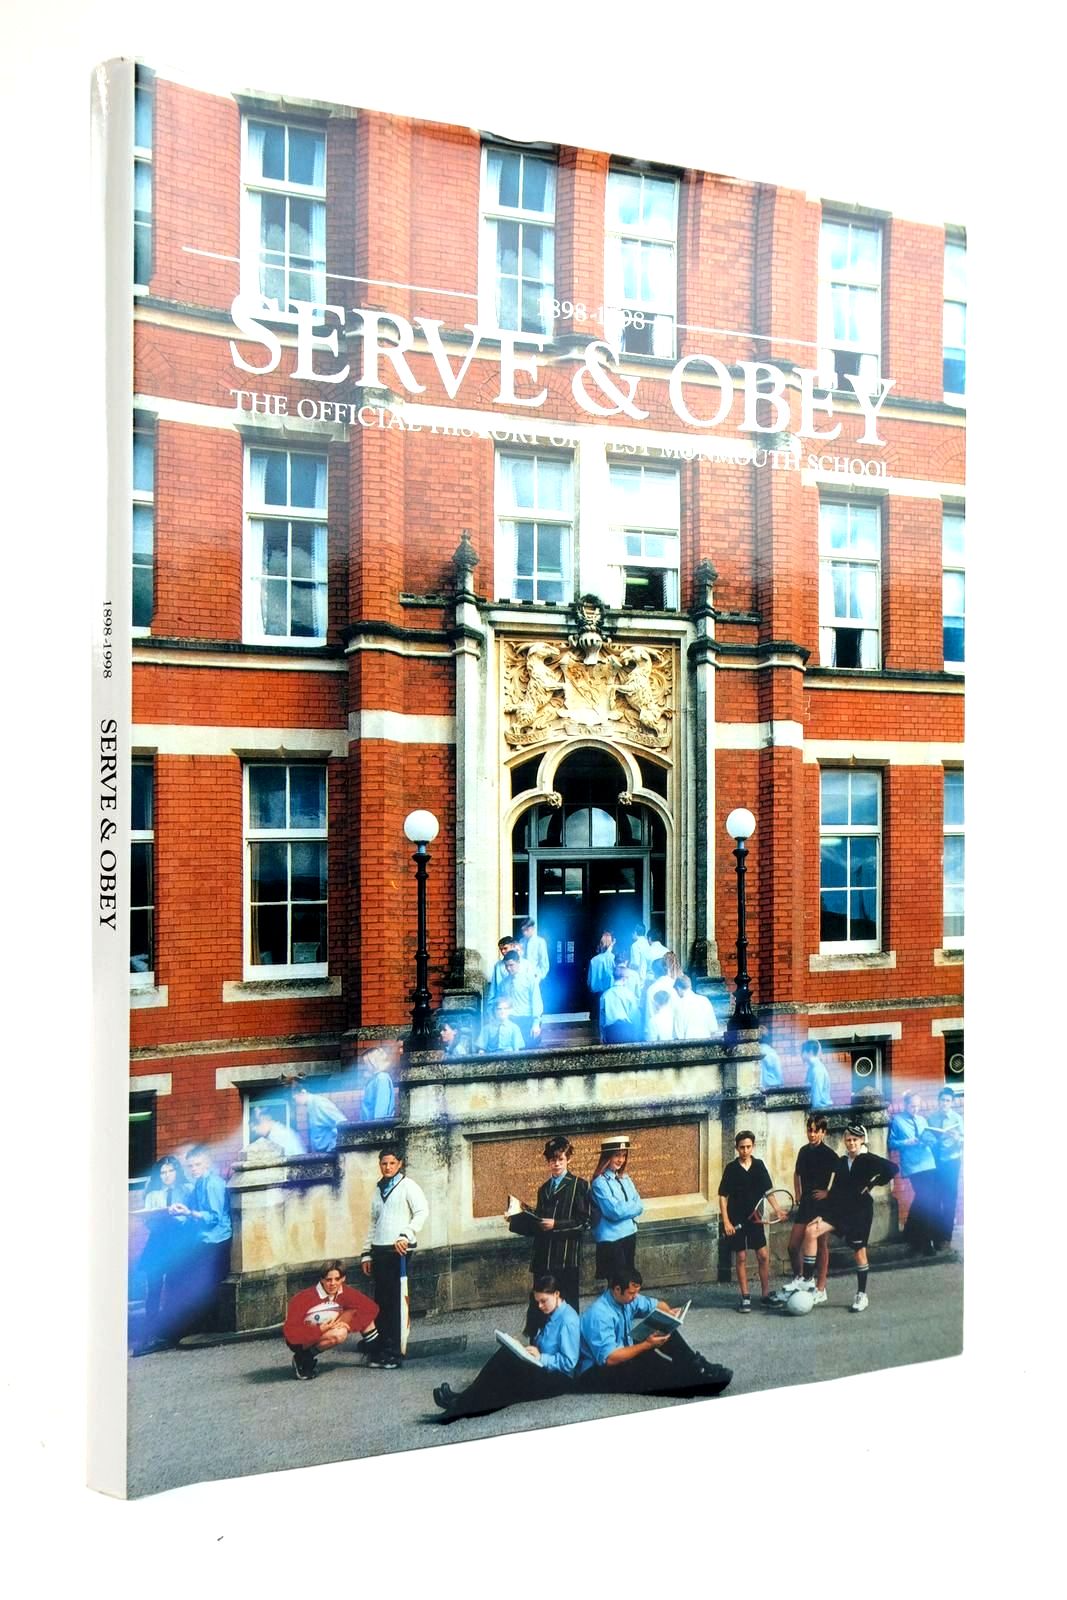 Photo of 1898-1998 SERVE &amp; OBEY: THE OFFICIAL HISTORY OF WEST MONMOUTH SCHOOL written by Crane, Arthur published by West Monmouth School (STOCK CODE: 2135692)  for sale by Stella & Rose's Books